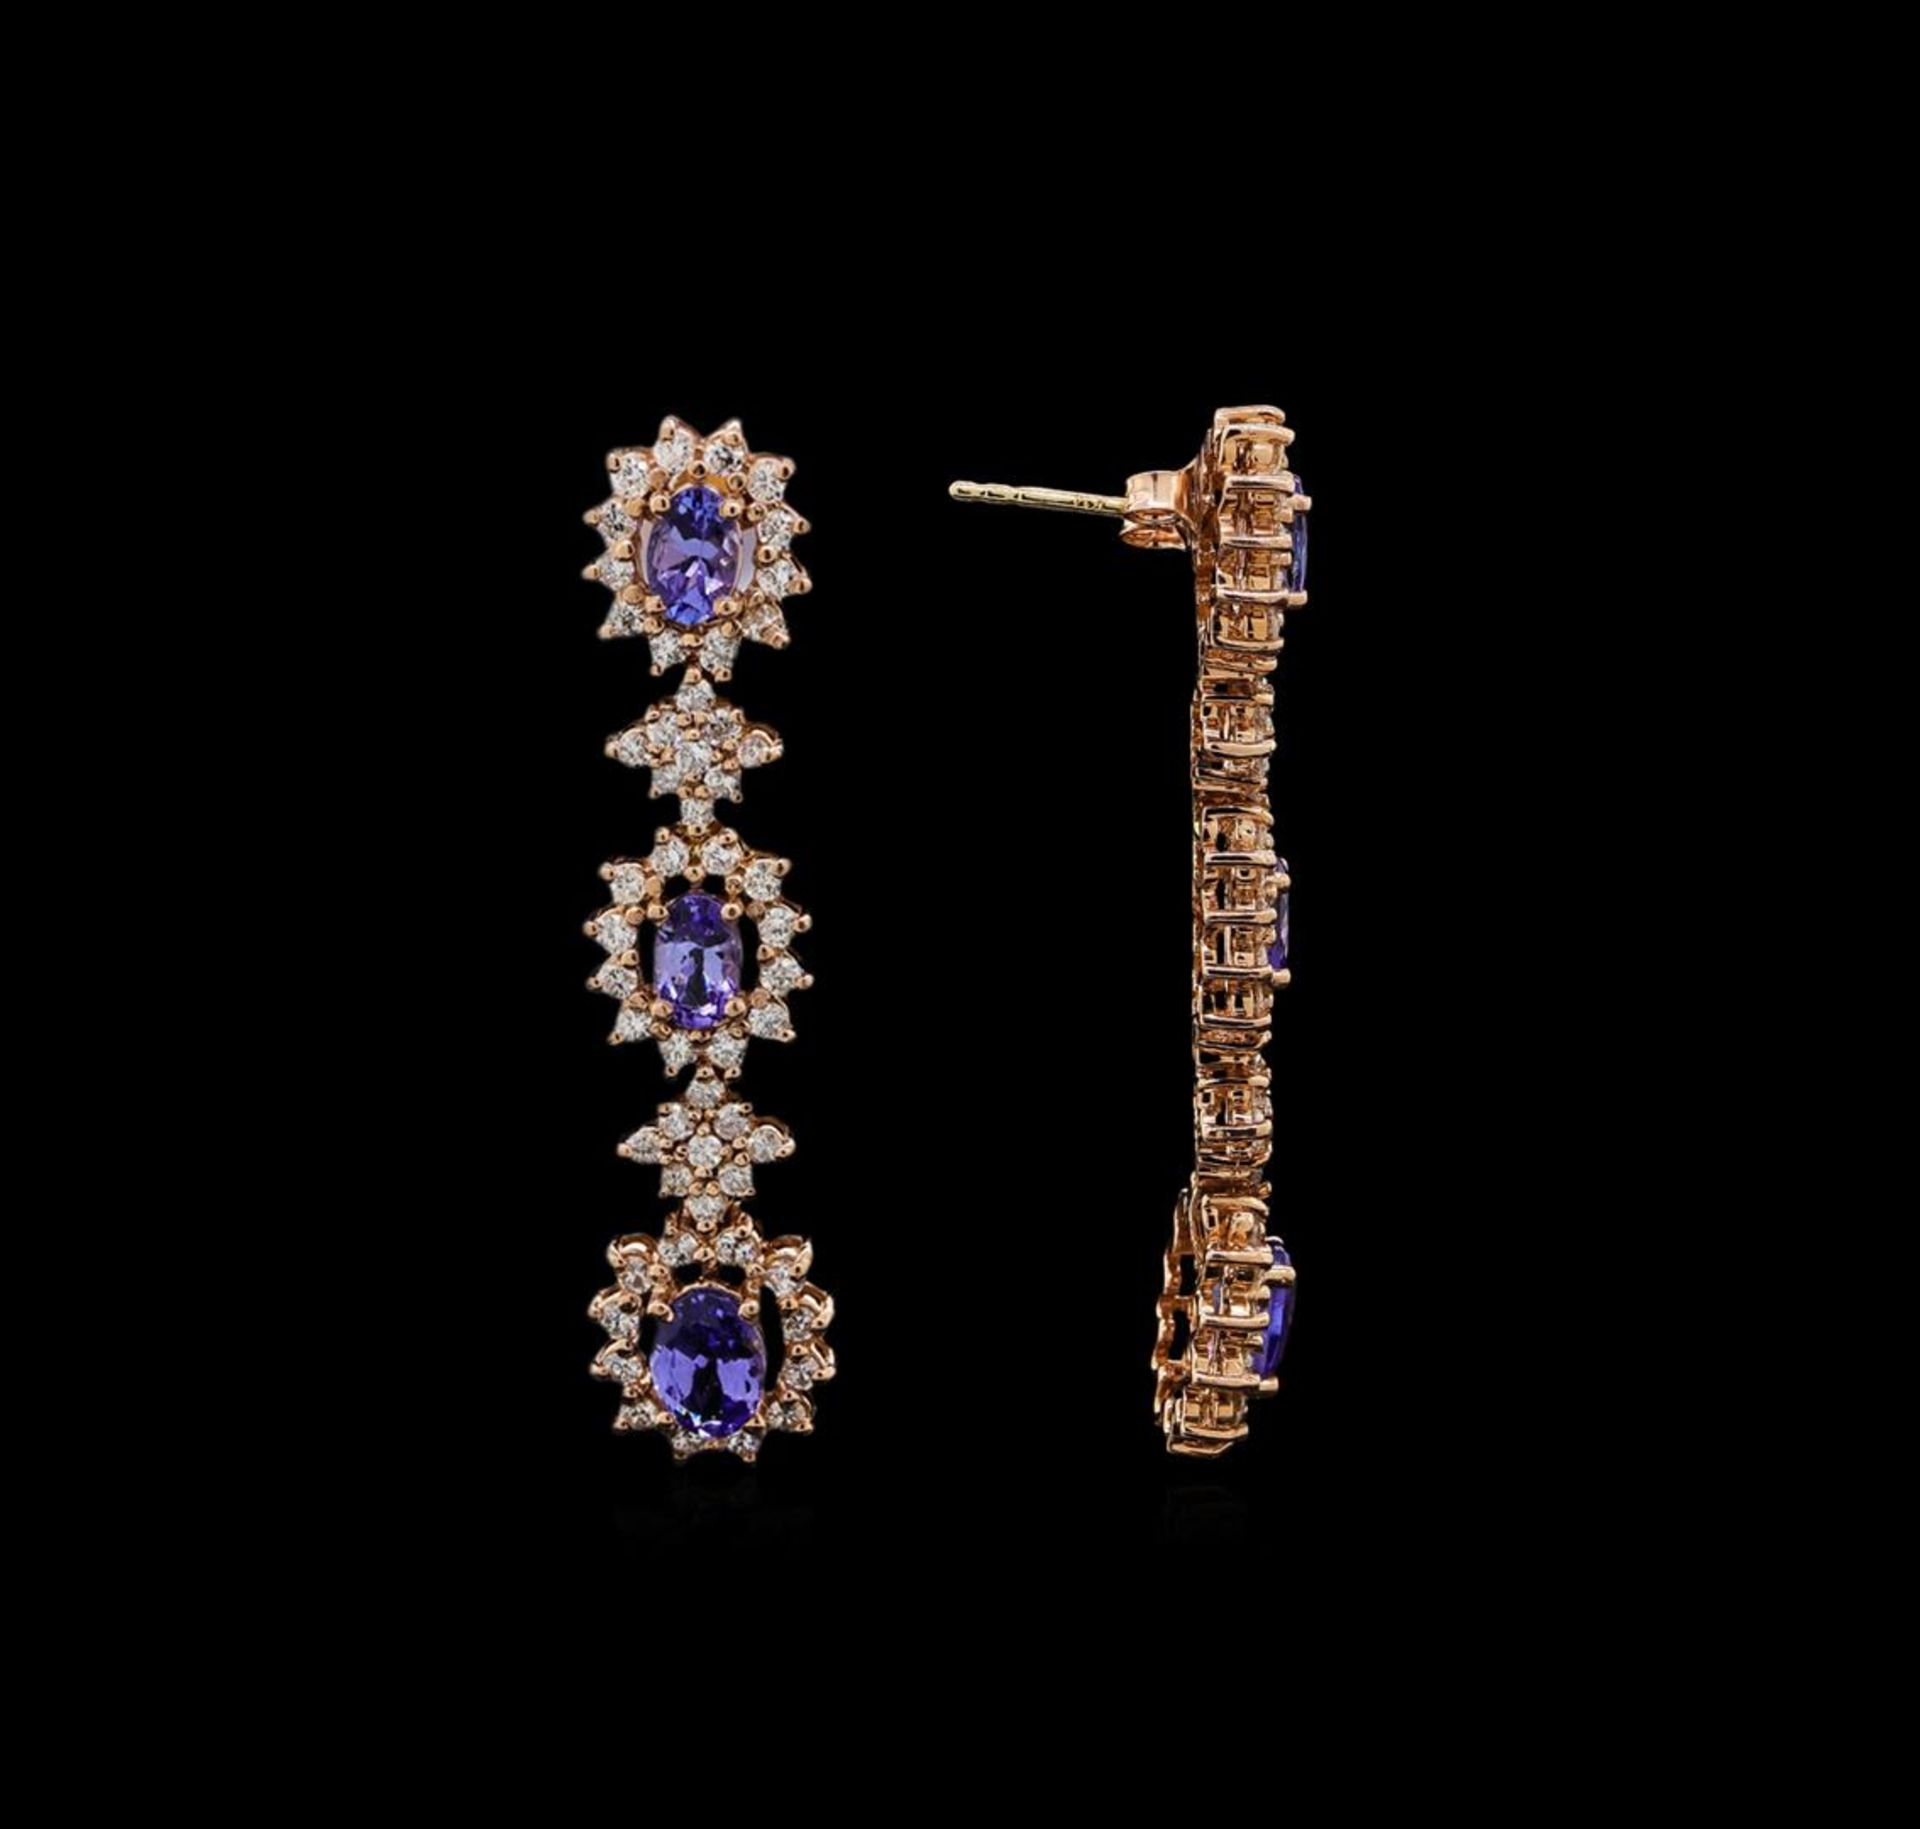 14KT Rose Gold 5.16 ctw Tanzanite and Diamond Earrings - Image 4 of 6